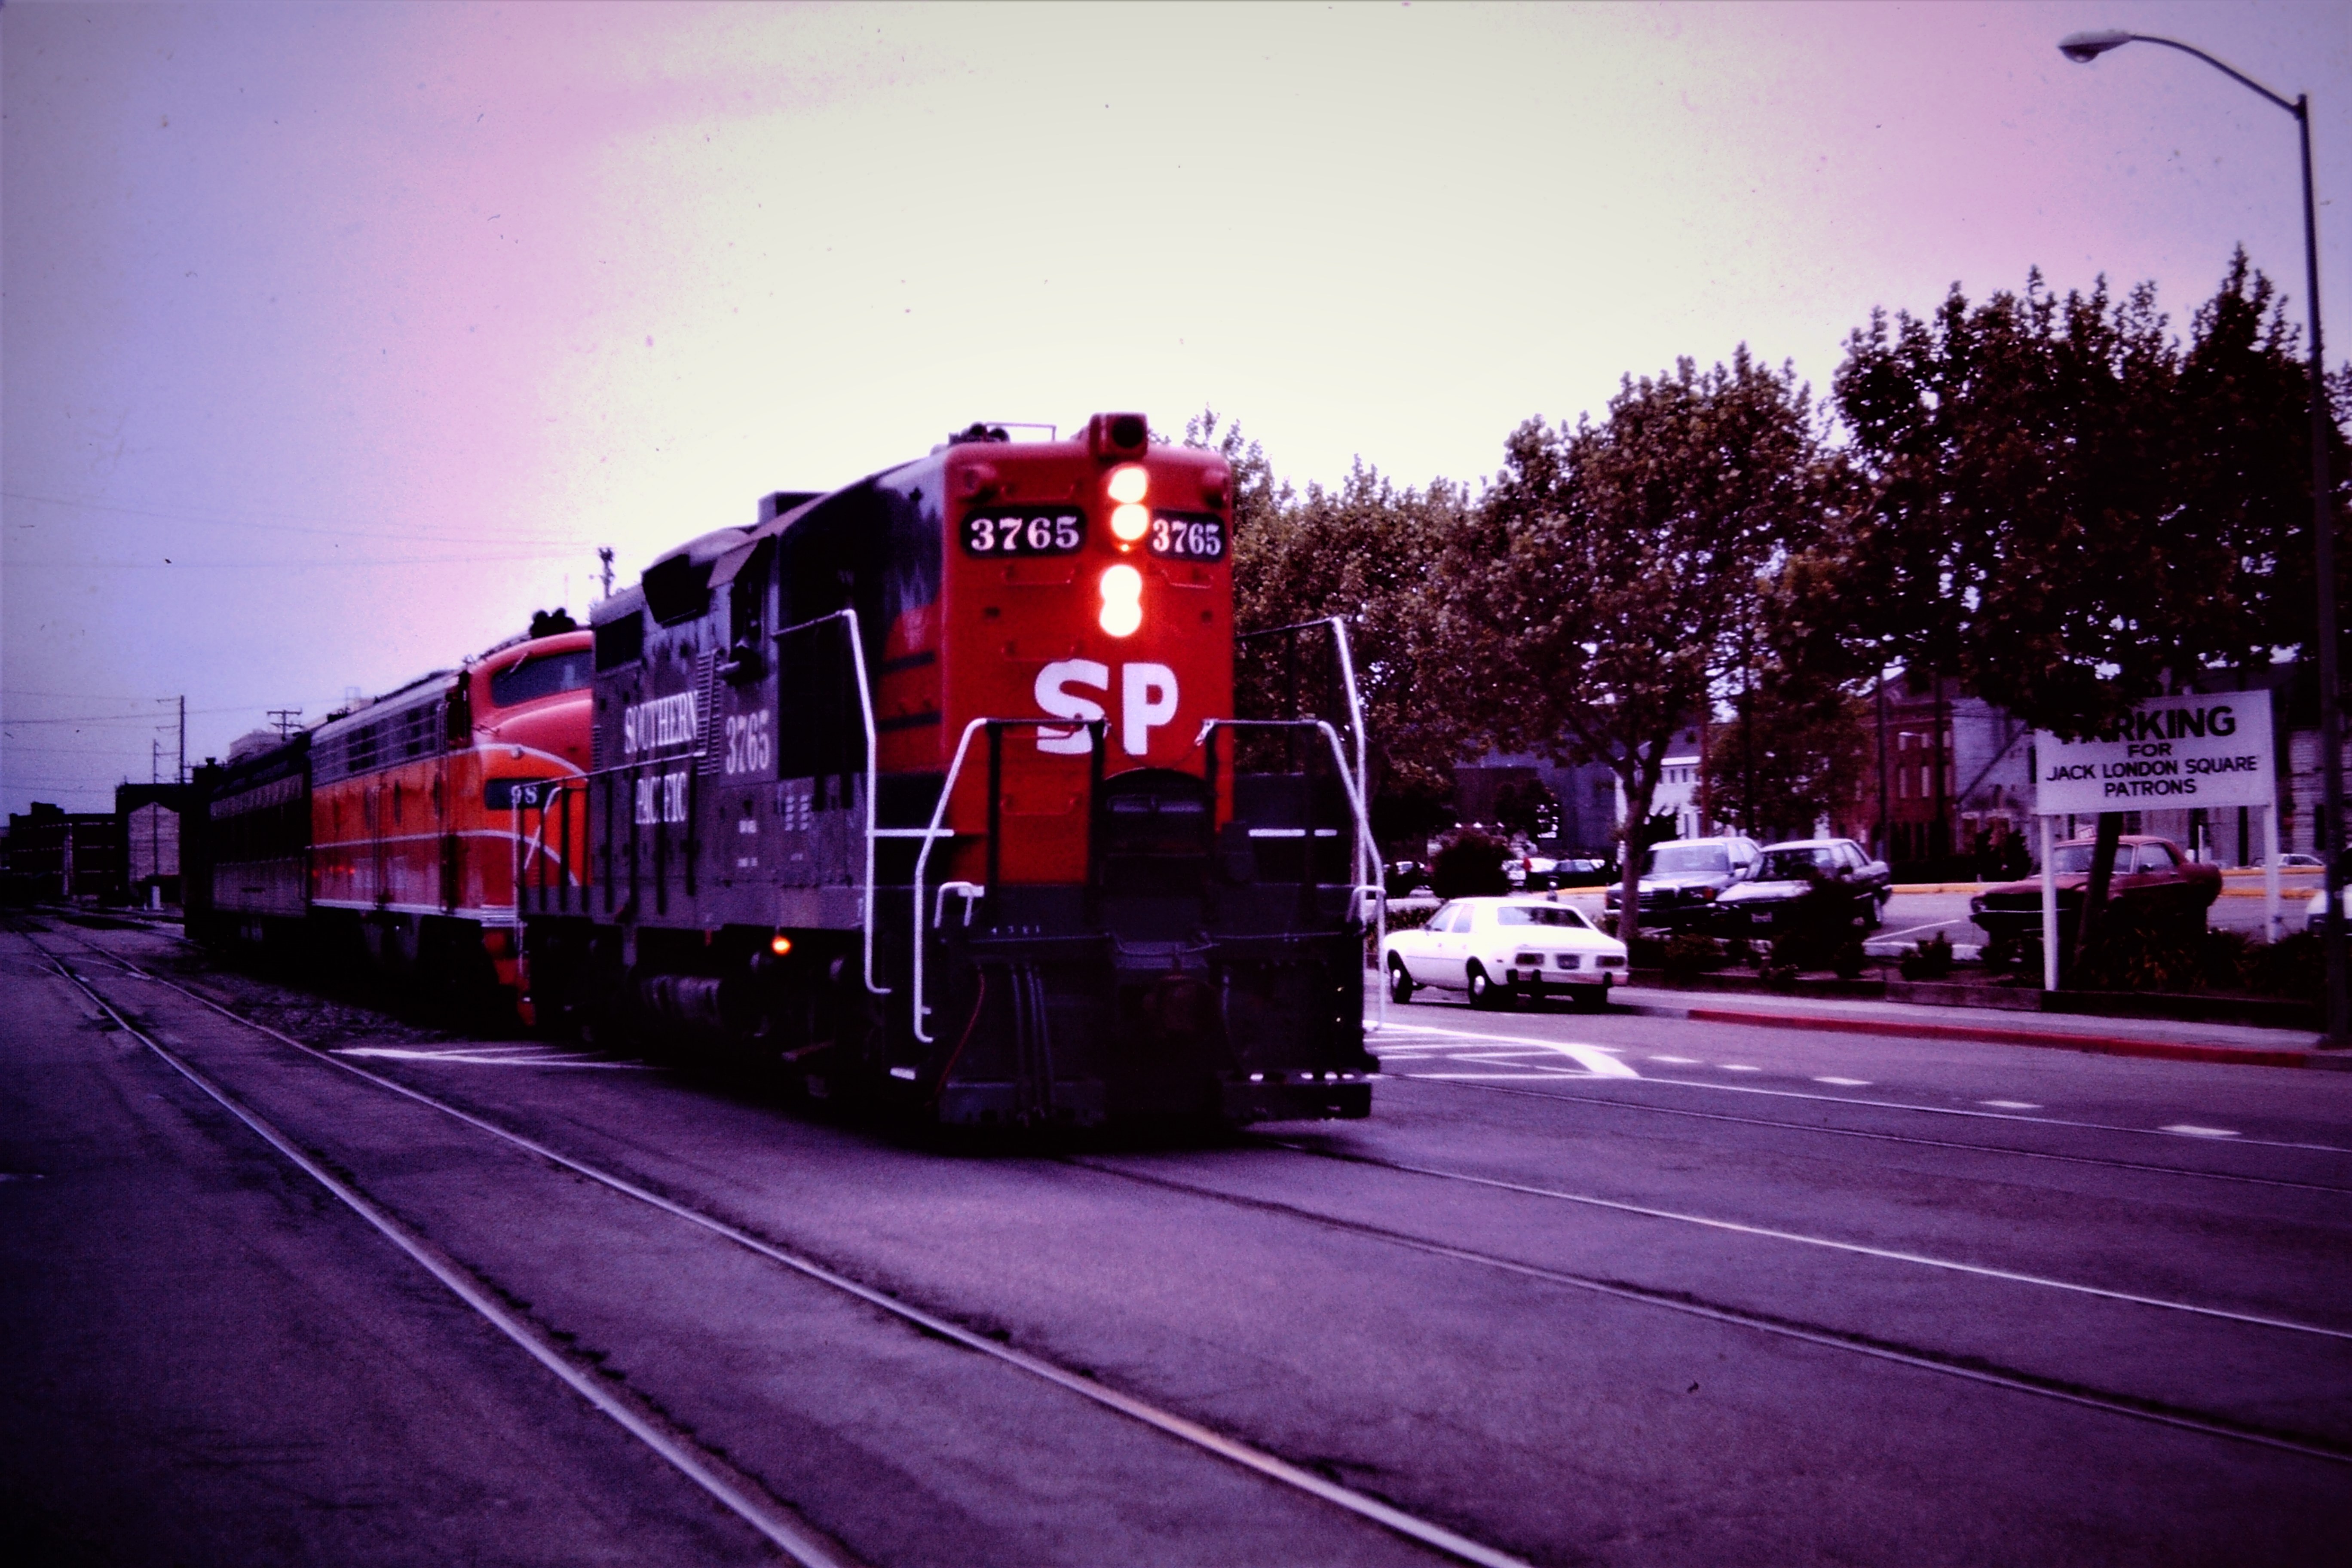 MAY 1985 in Oakland, Ca. I suspect a "museum" move of some sort. SP 3765 lights ablaze at Jack London Square. 